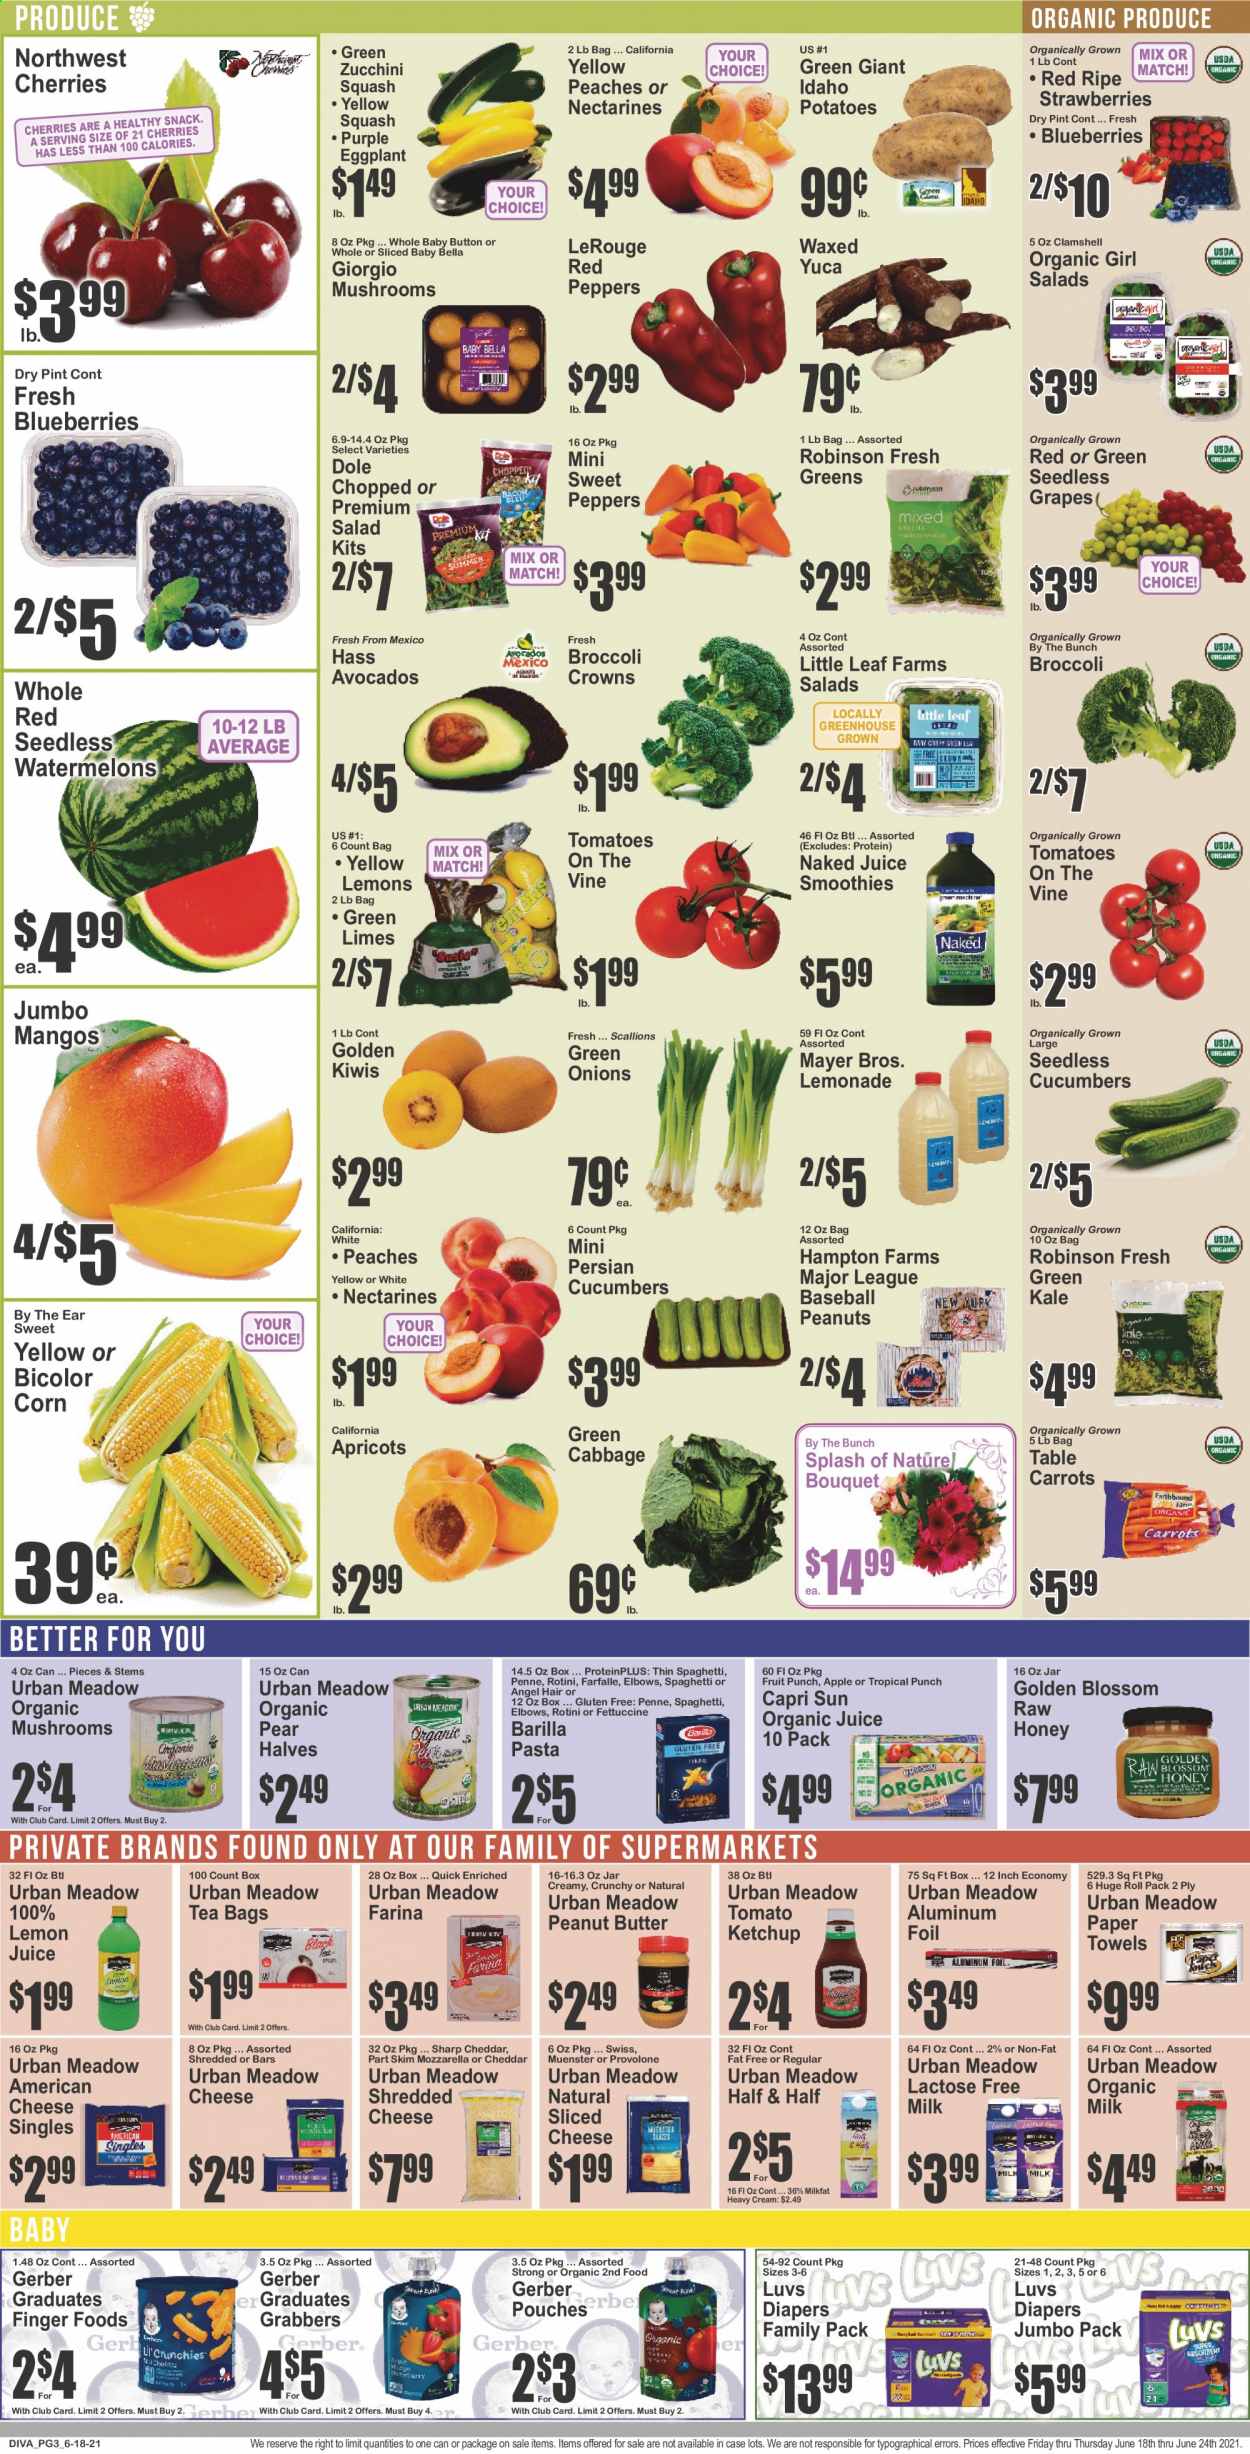 thumbnail - Key Food Flyer - 06/18/2021 - 06/24/2021 - Sales products - mushrooms, seedless grapes, cabbage, carrots, corn, cucumber, sweet peppers, tomatoes, zucchini, kale, potatoes, salad, Dole, peppers, eggplant, green onion, yellow squash, red peppers, avocado, blueberries, grapes, kiwi, limes, mango, strawberries, pears, apricots, spaghetti, pasta, Barilla, american cheese, mozzarella, shredded cheese, sliced cheese, Münster cheese, Provolone, organic milk, lactose free milk, Blossom, Gerber, penne, ketchup, honey, peanut butter, peanuts, Capri Sun, lemonade, fruit punch, smoothie, lemon juice, tea bags, baby food pouch, nappies, kitchen towels, paper towels, bouquet, nectarines, Half and half, peaches. Page 3.